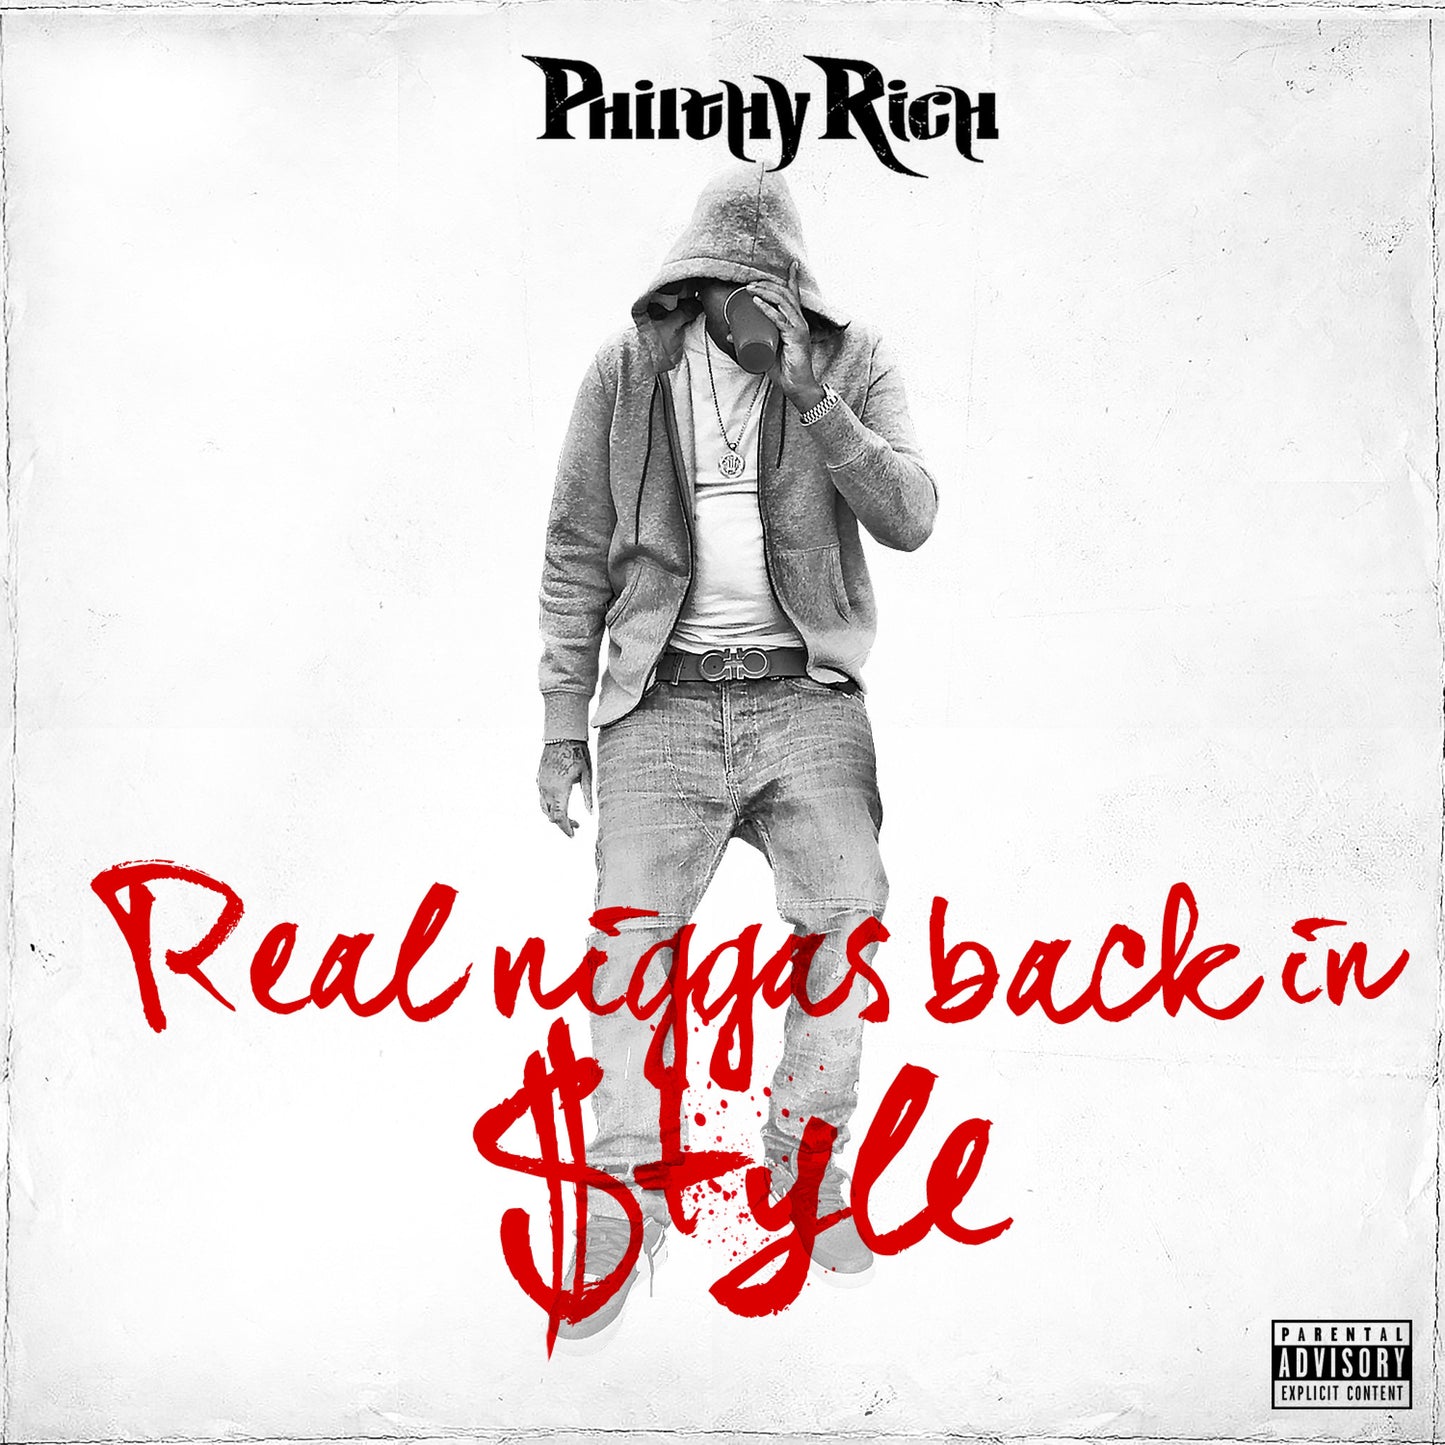 Philthy Rich - Real N*ggas Back in $tyle CD